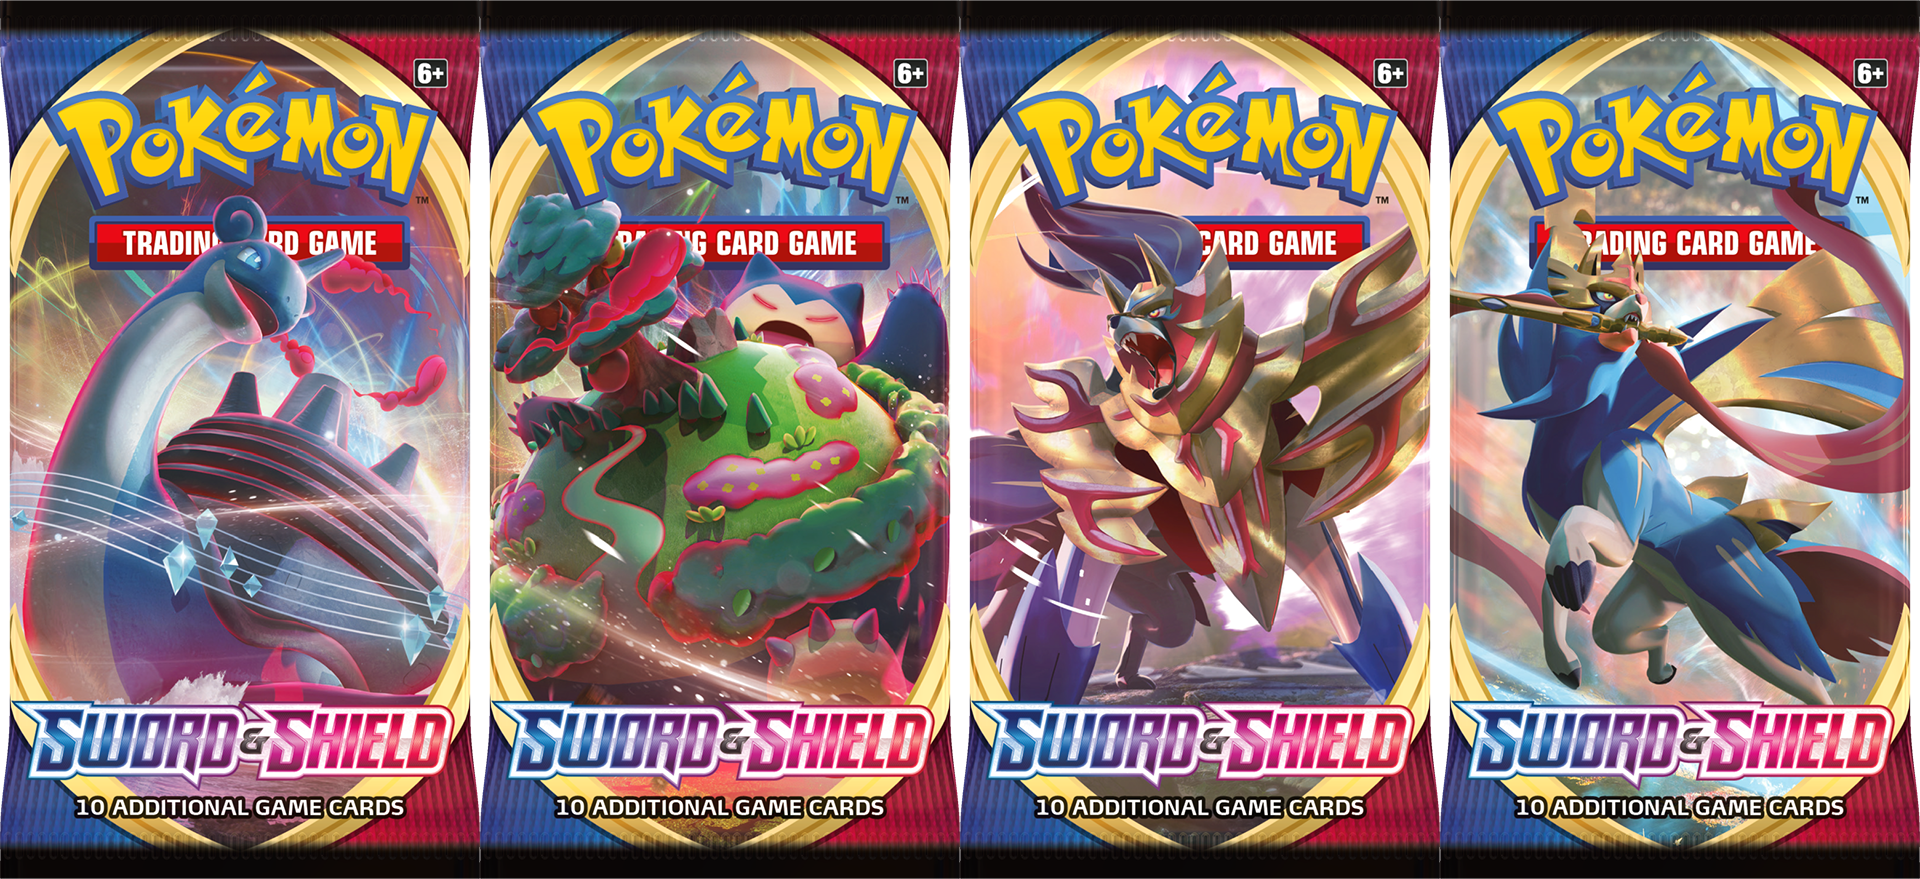 The Pokémon Trading Card Game Enters The Sword And Shield Era Today With The Release Of The First Ex